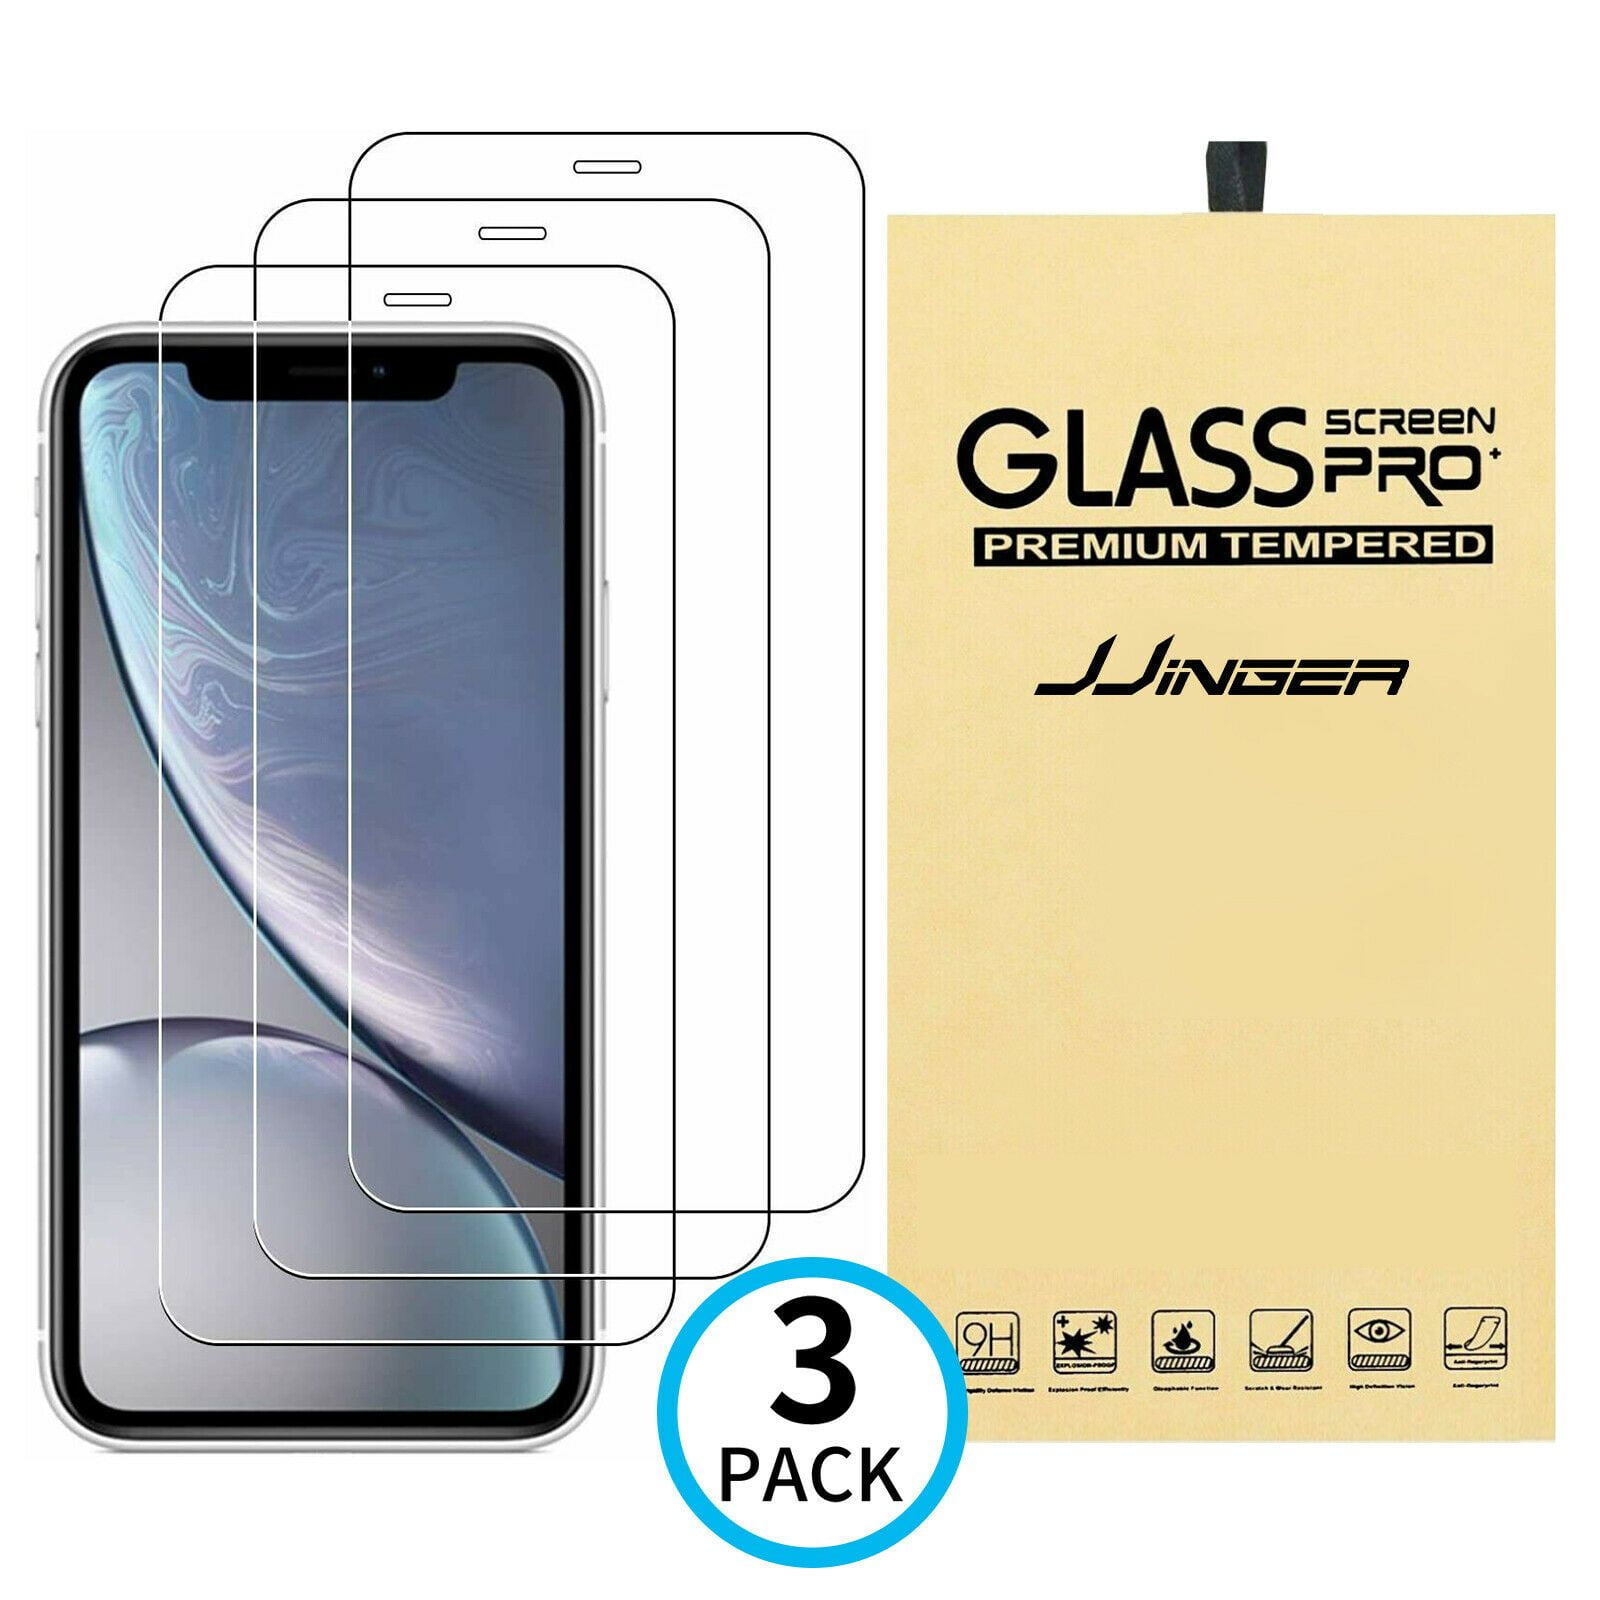 Tempered Glass Screen Protector Cover For Iphone 12 11 Pro Max X Xs Xr 8 7 6 3 Pack Walmart Com